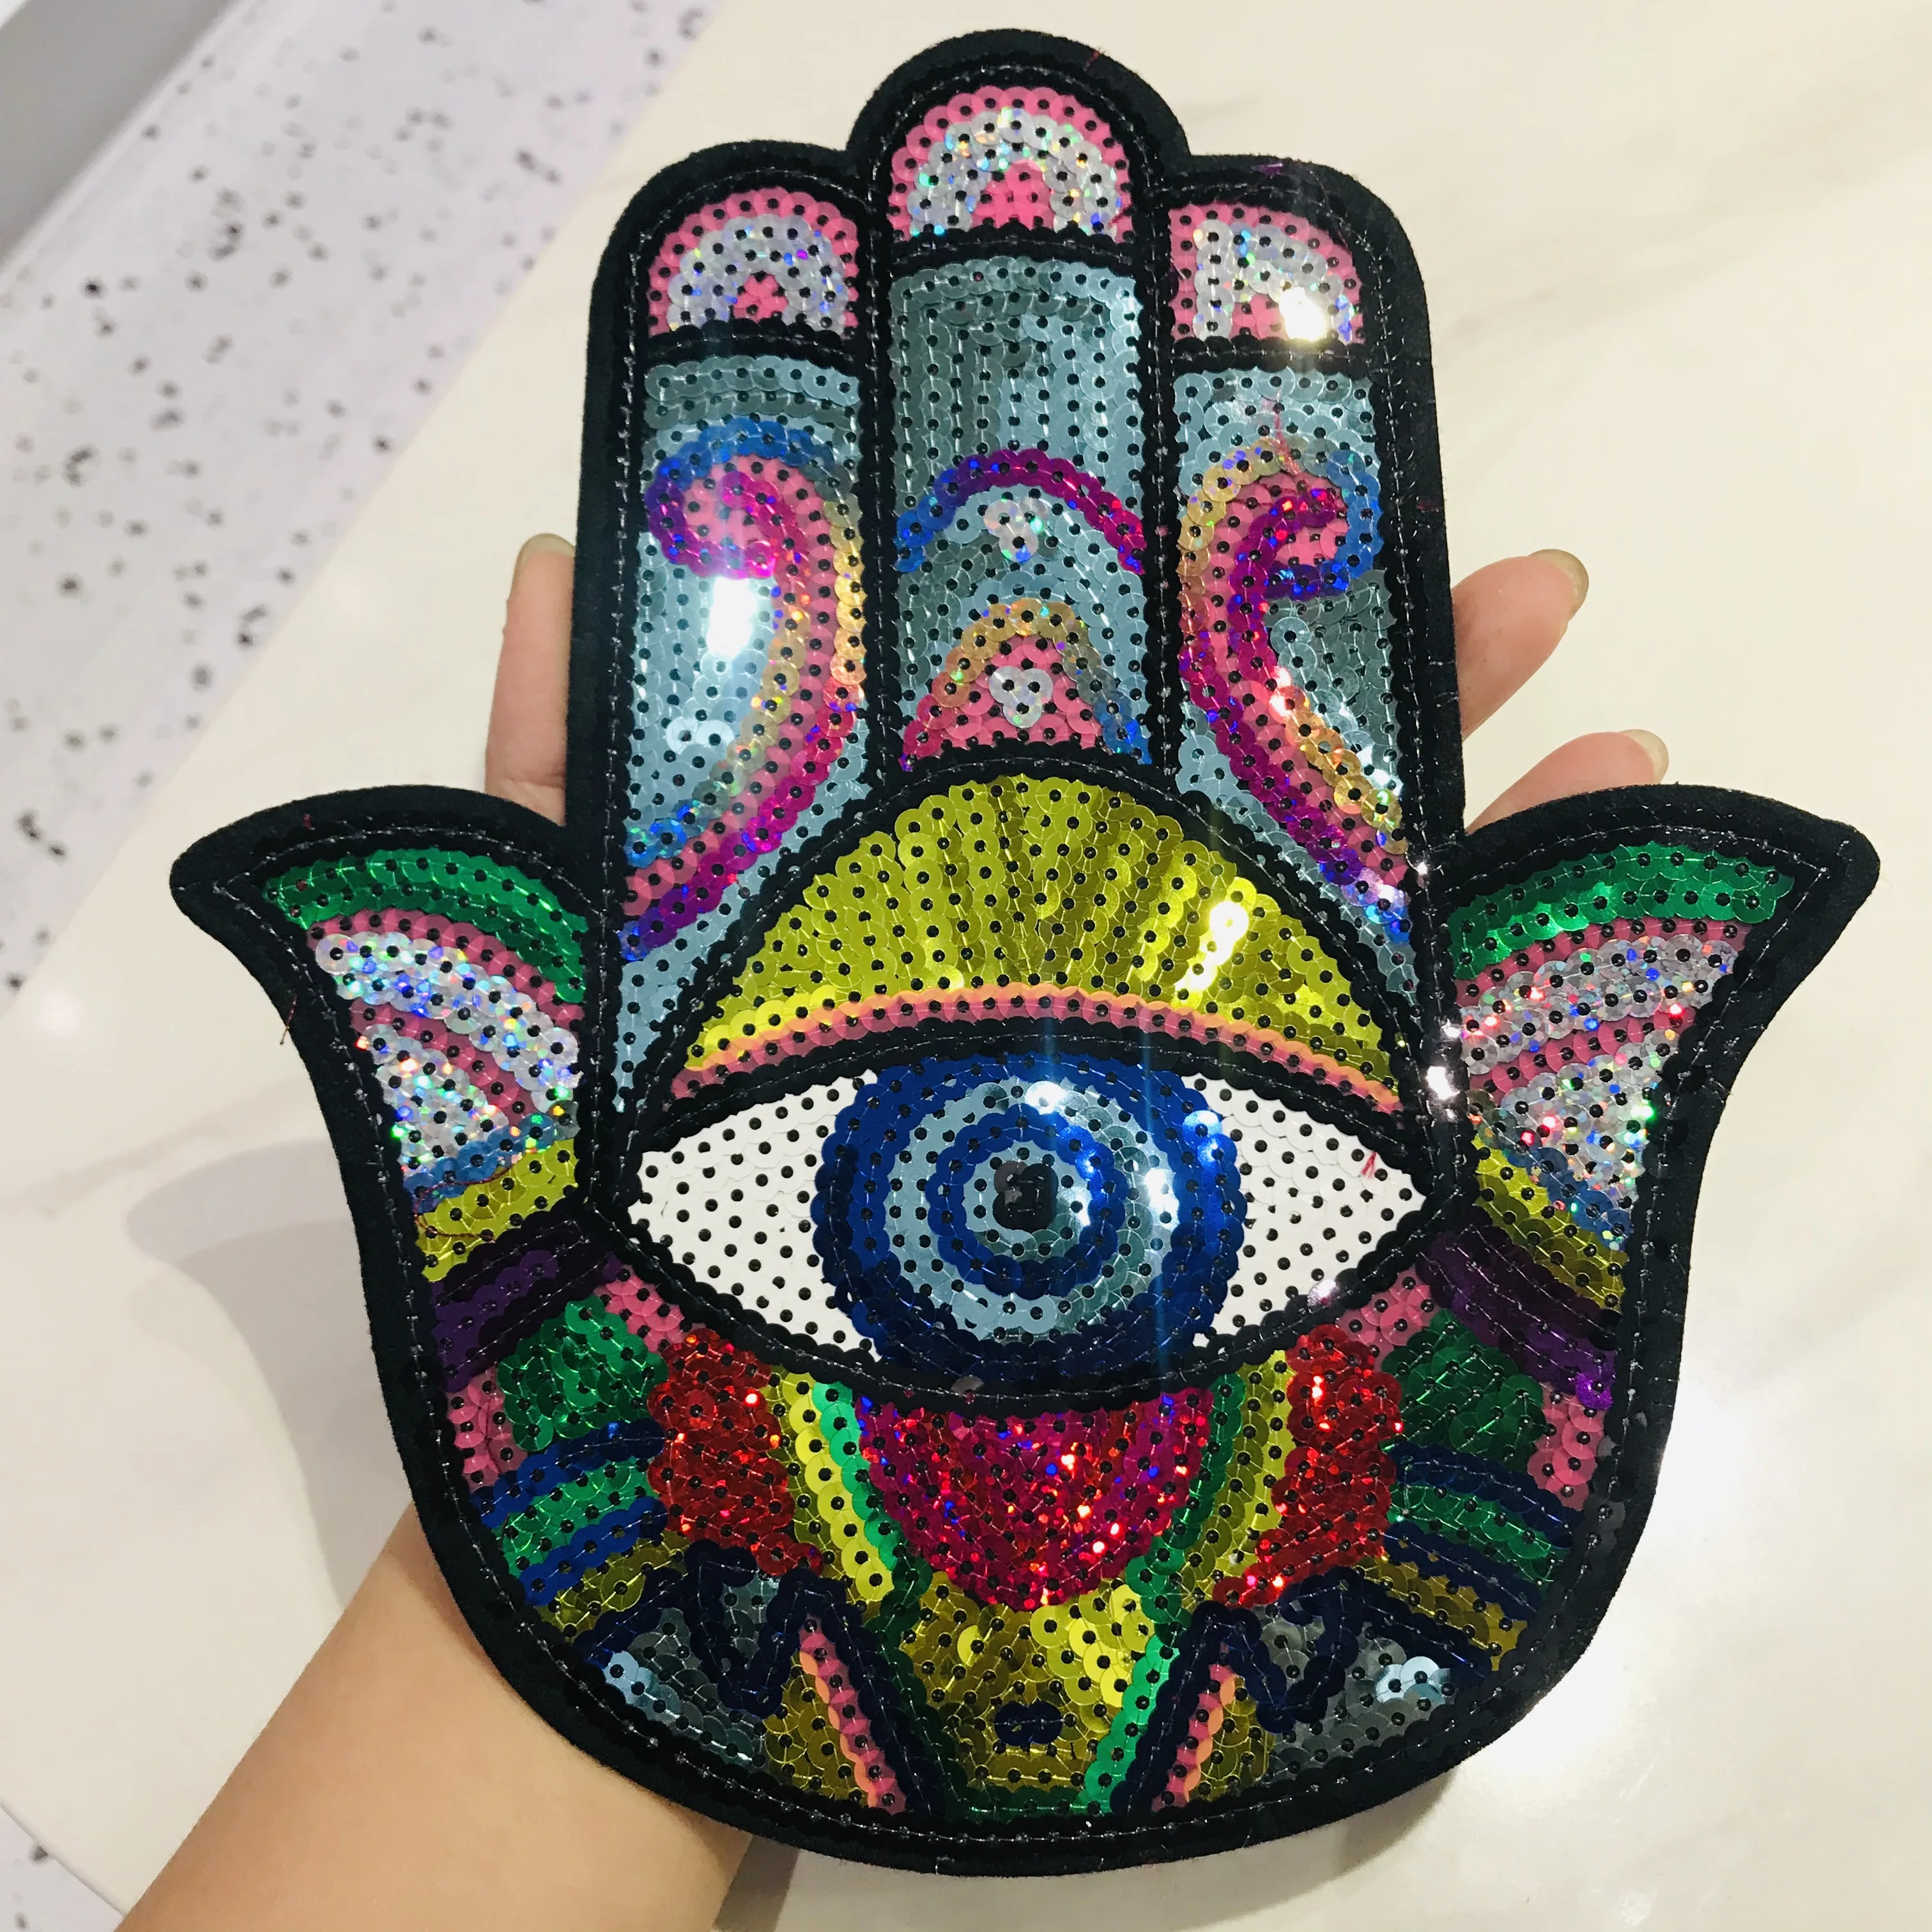 Sequined Hand Eye Bee Lip Letter Patches Embroidery Applique Sew On for Clothes DIY Garment Accessories Badge Stickers 5 Pcs Style 3 